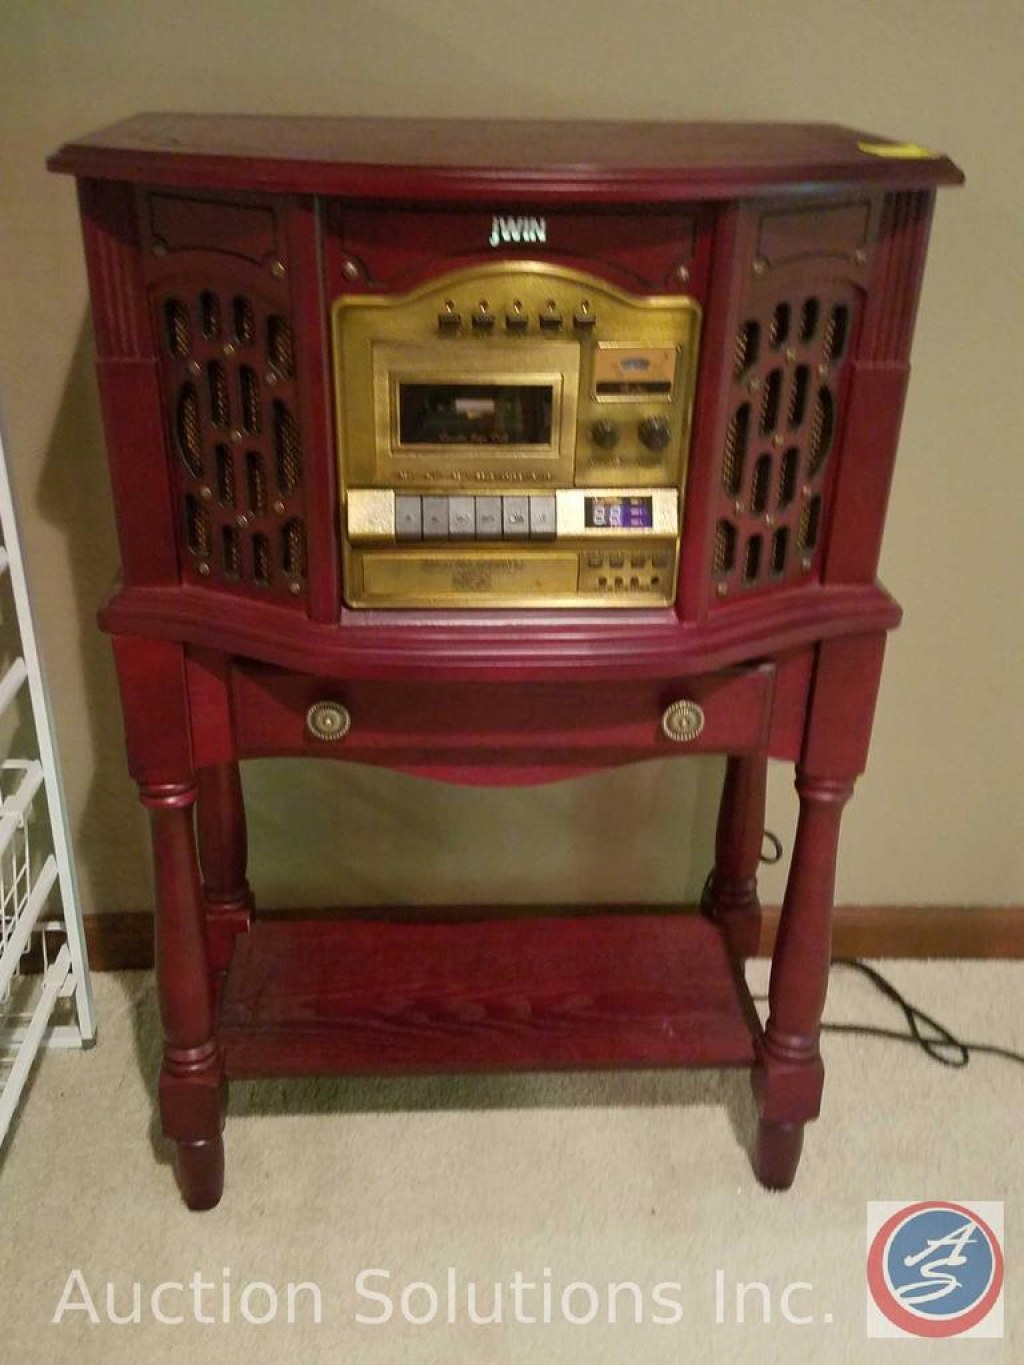 Picture of: jWin Stereo System with Turntable CD Changer, Cassette Deck, and